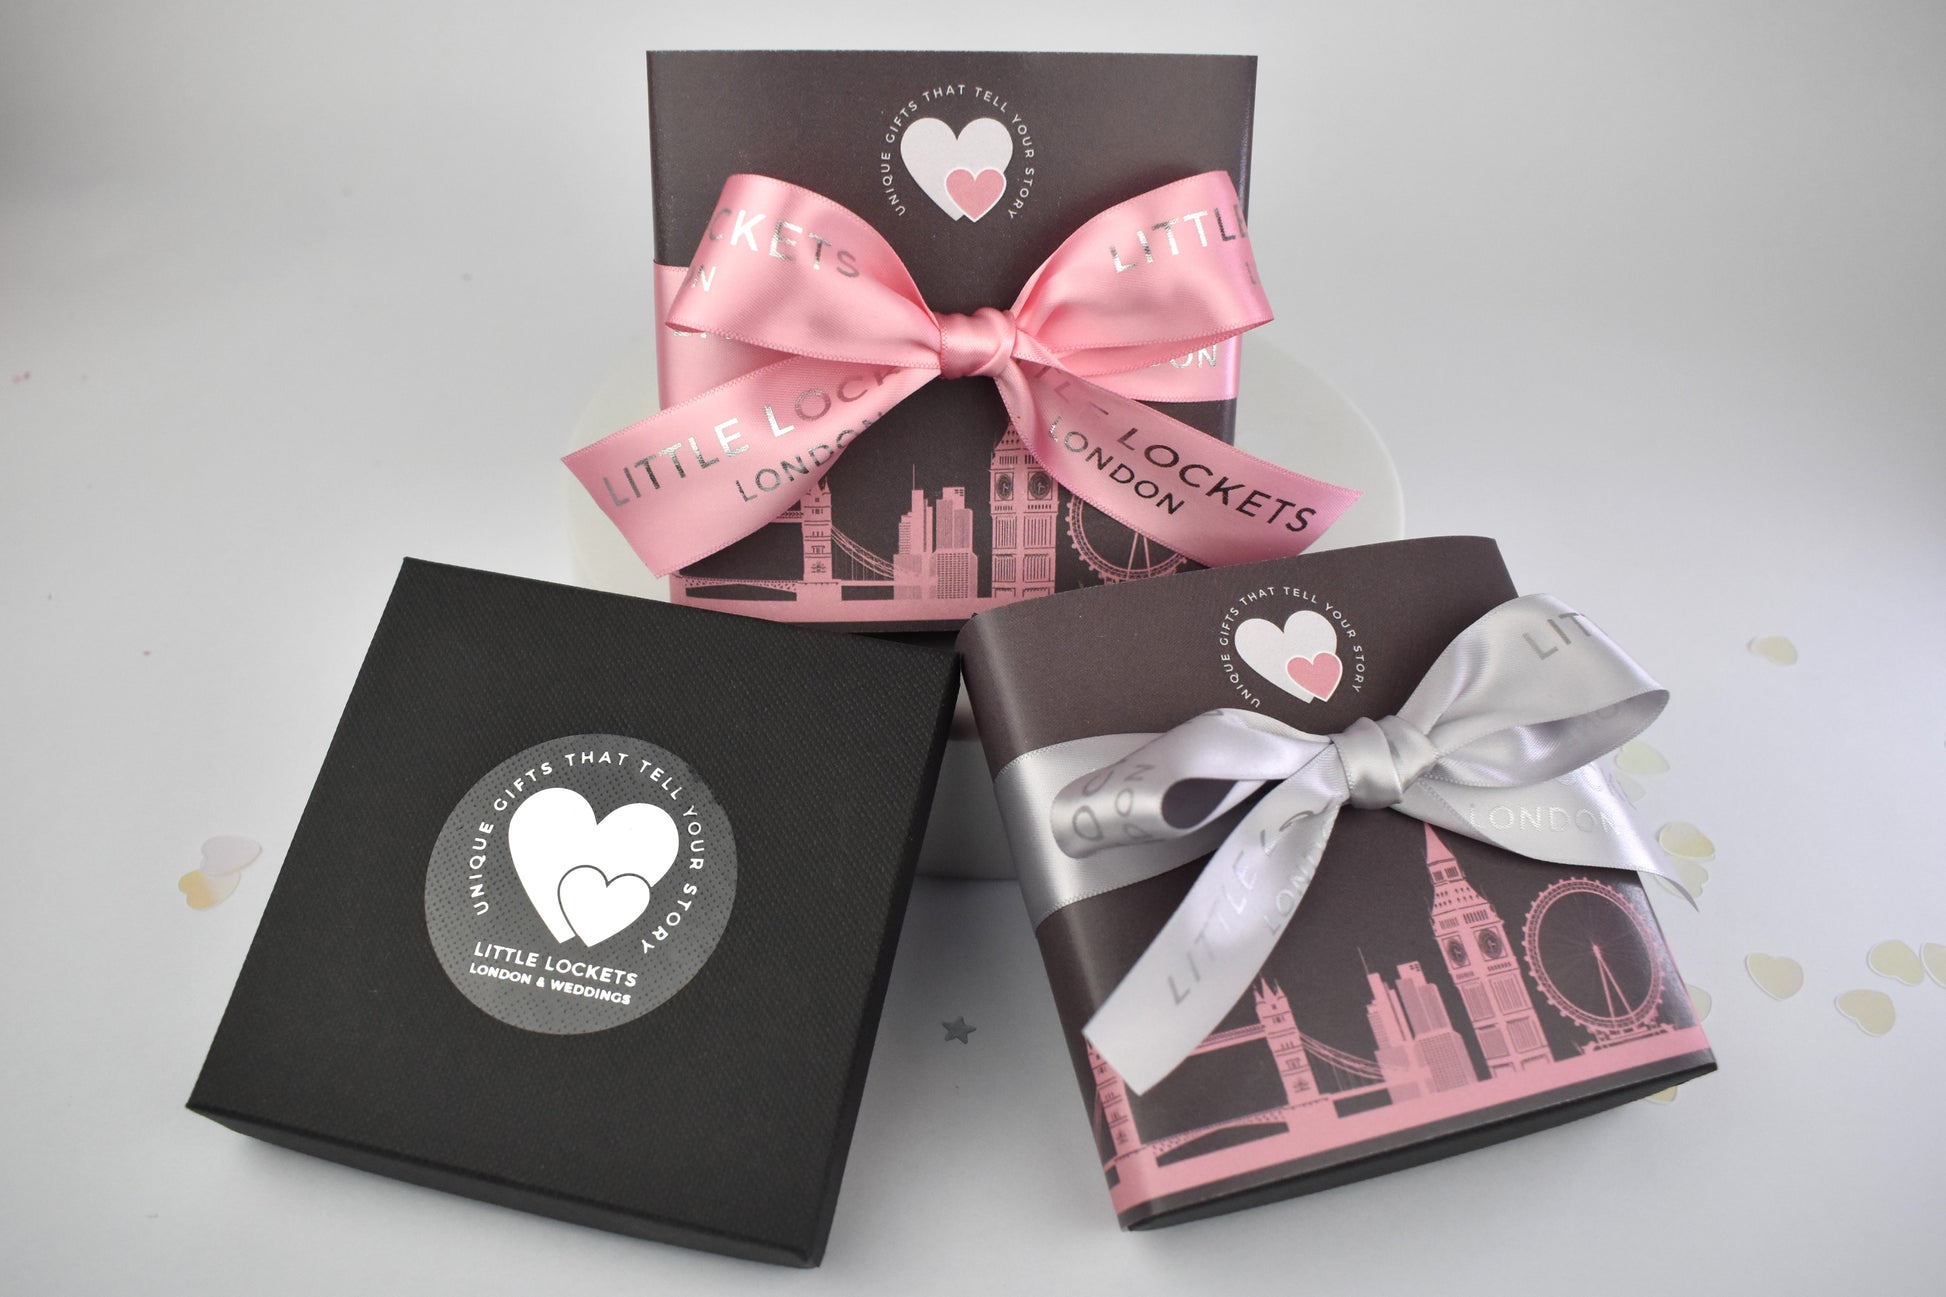 Your bracelet will arrive in a branded gift box or upgrade to a London skyline wrap and pink or grey ribbon tie